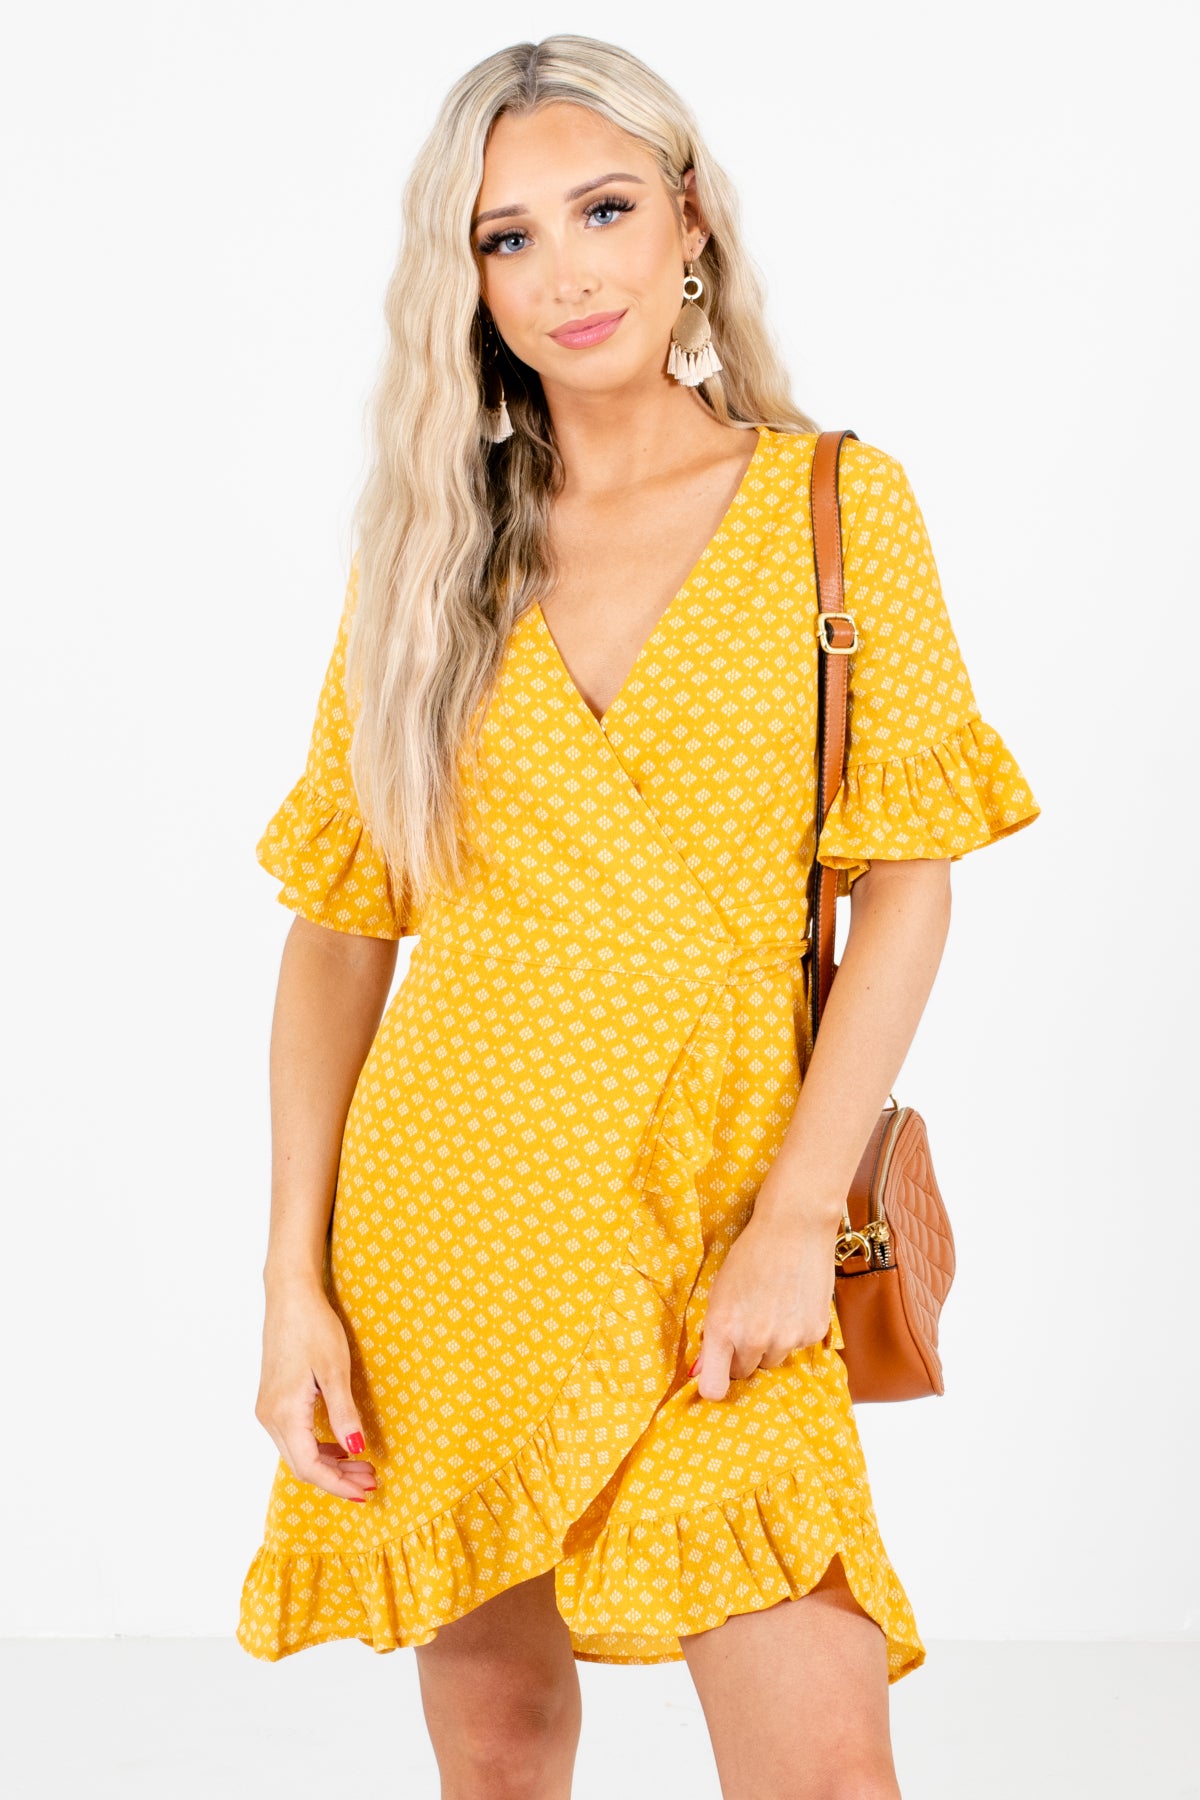 Yellow Patterned Boutique Mini Dresses for Women